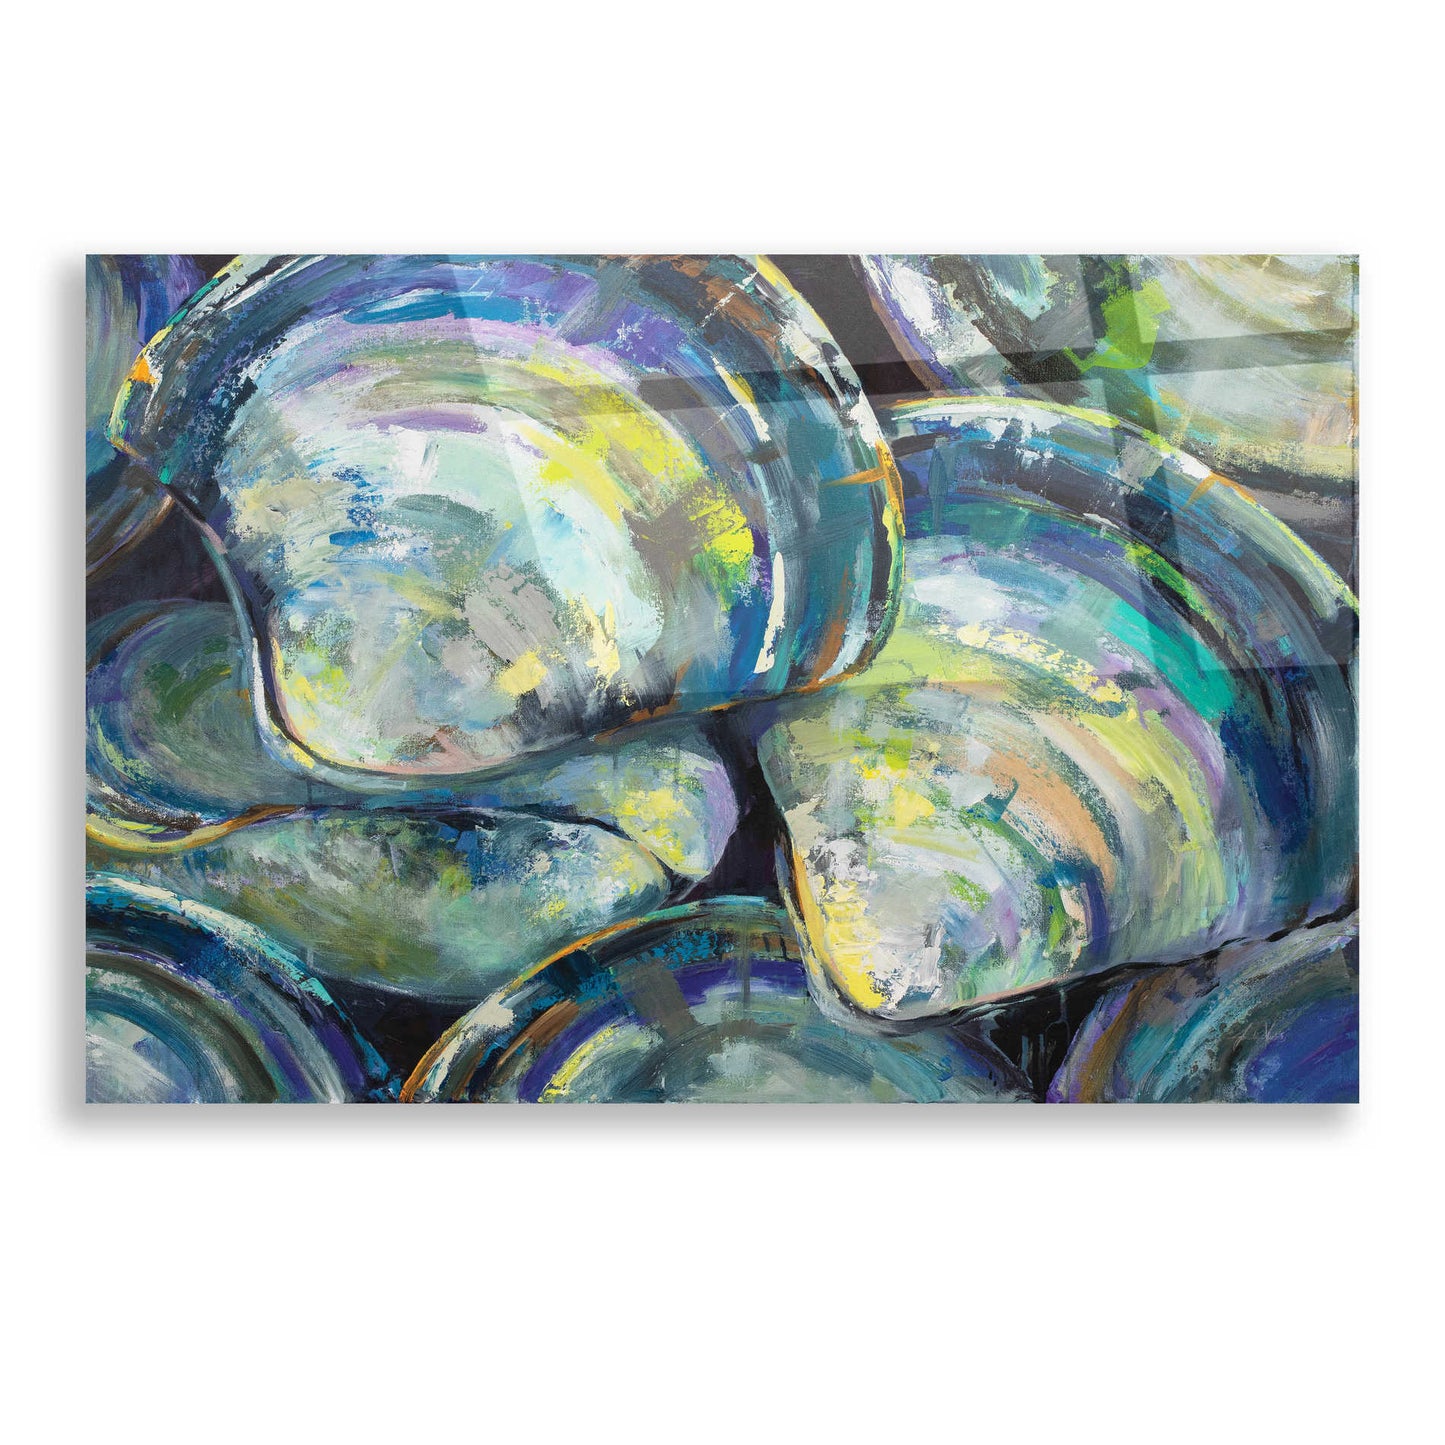 Epic Art 'Variety' by Jeanette Vertentes, Acrylic Glass Wall Art,16x12